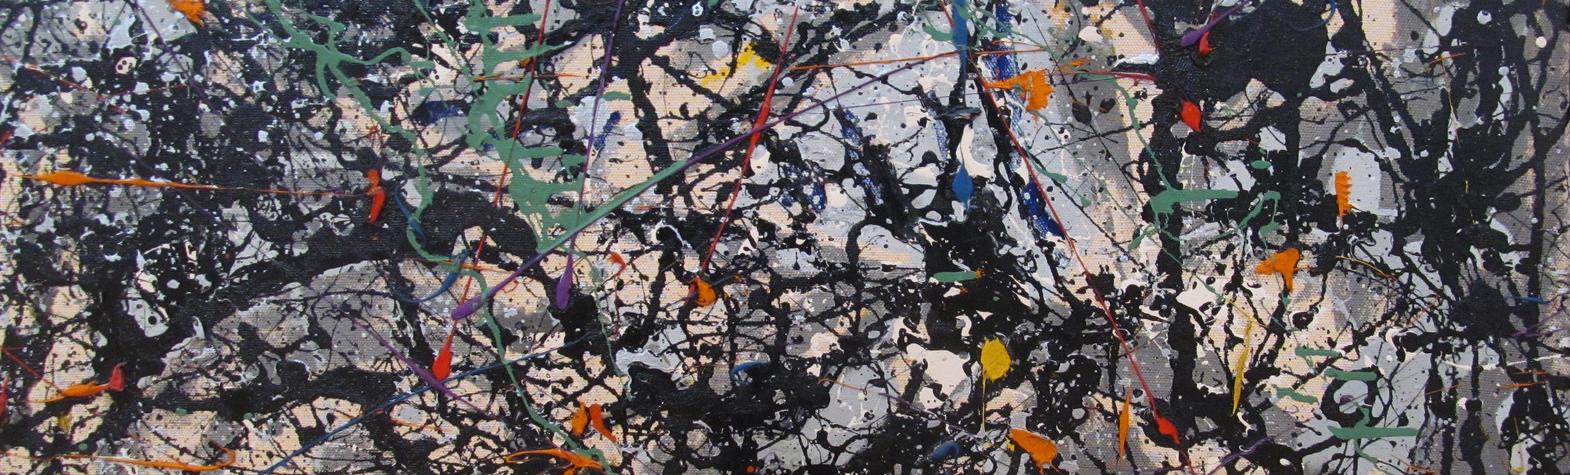 Jackson Pollock:Lucifer (detail) © Copyright Rob Corder Licensed under Creative Commons